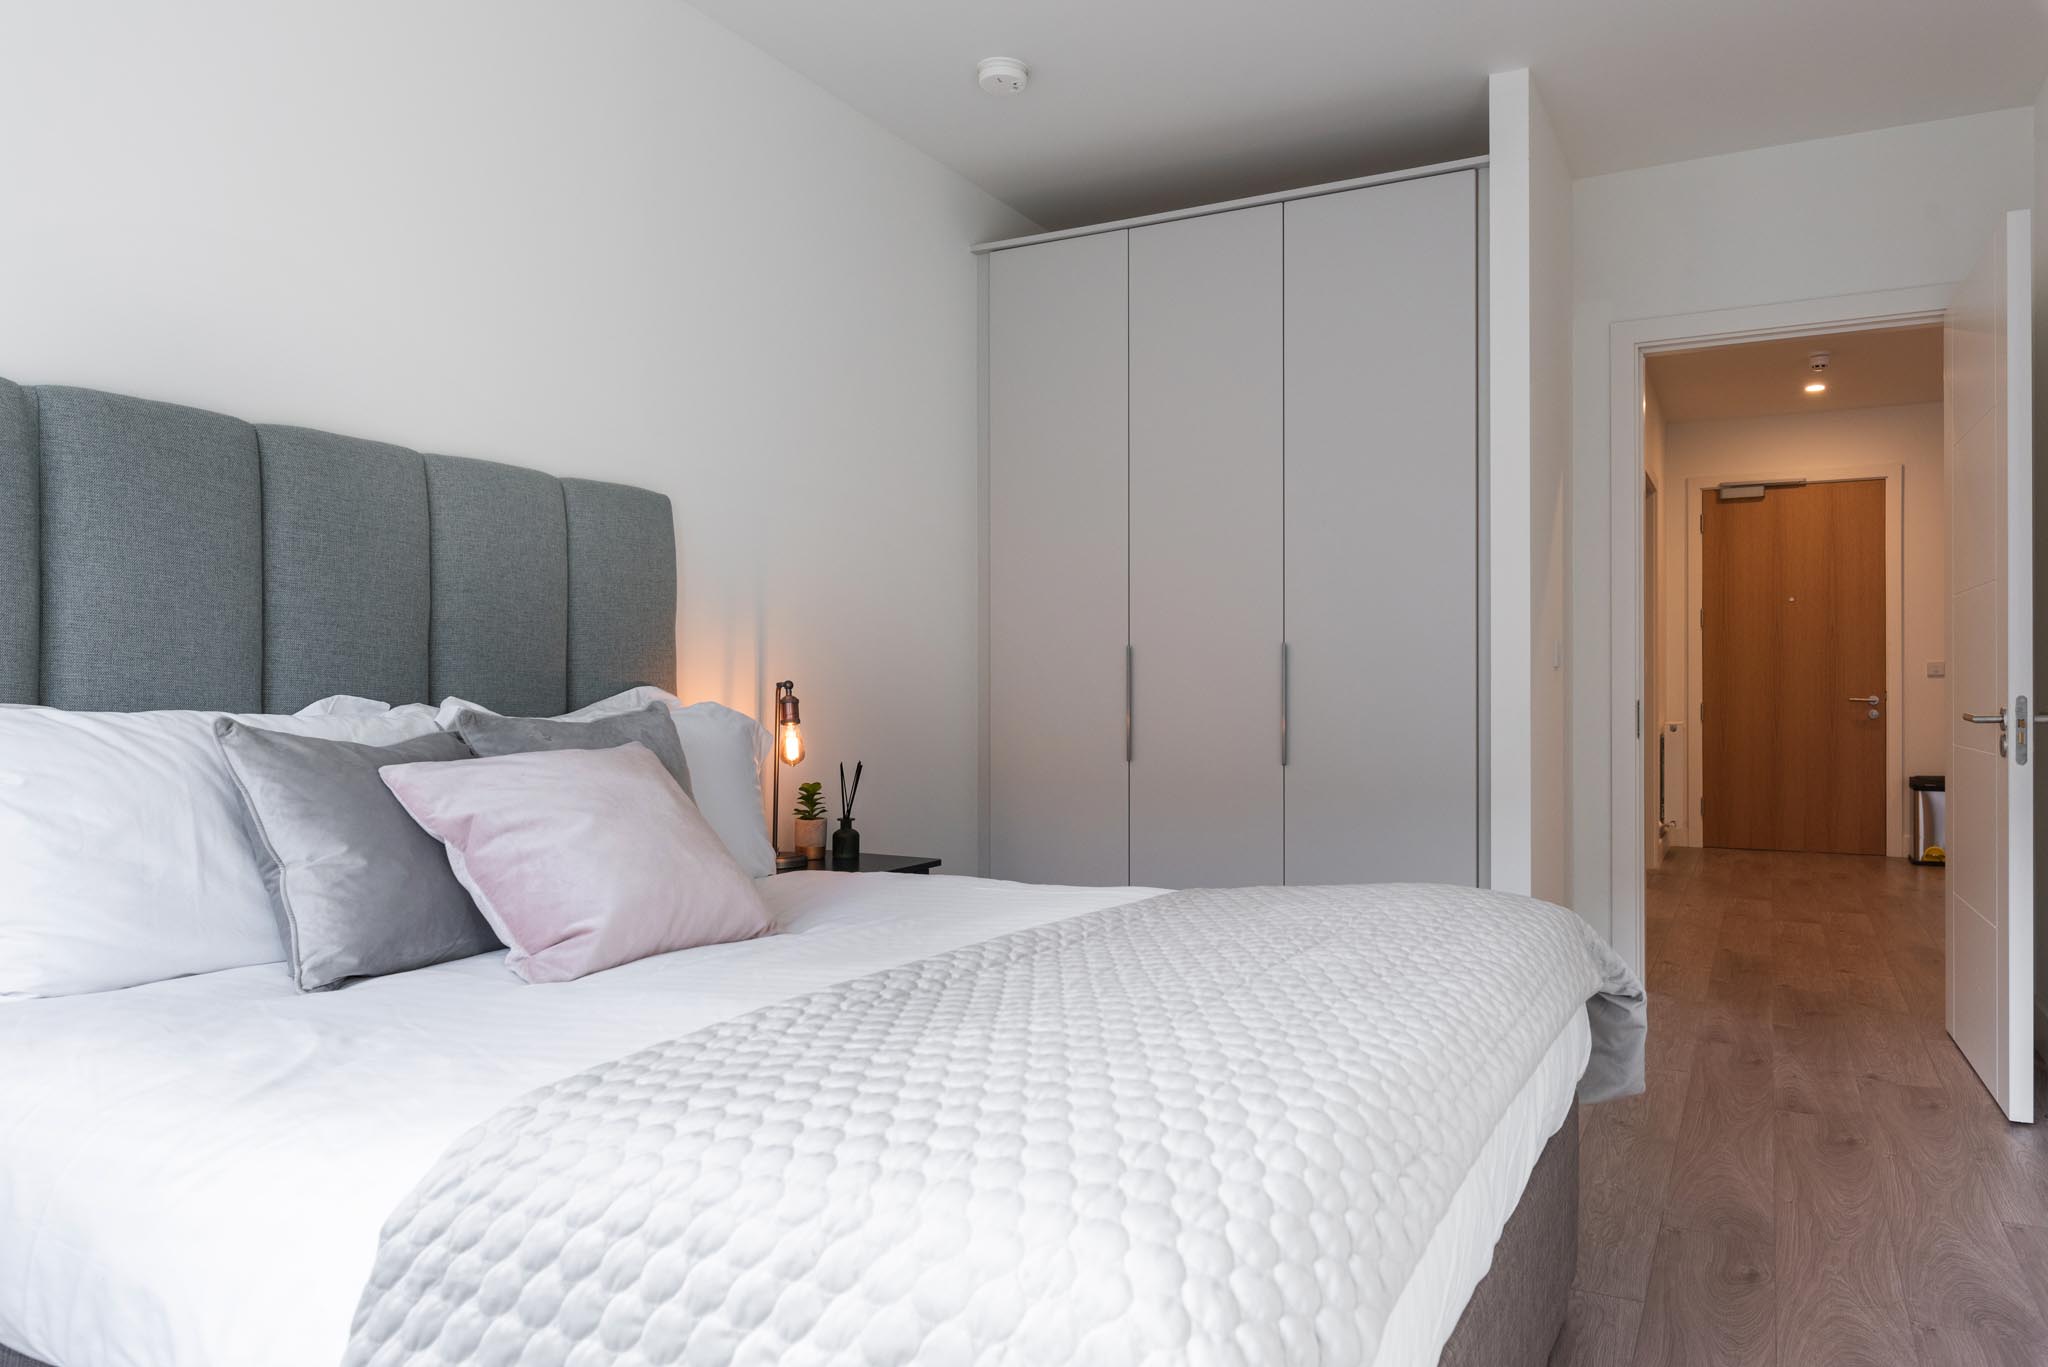 Bedroom - One Bedroom Apartment - Urban Rest- Griffith Wood Dublin